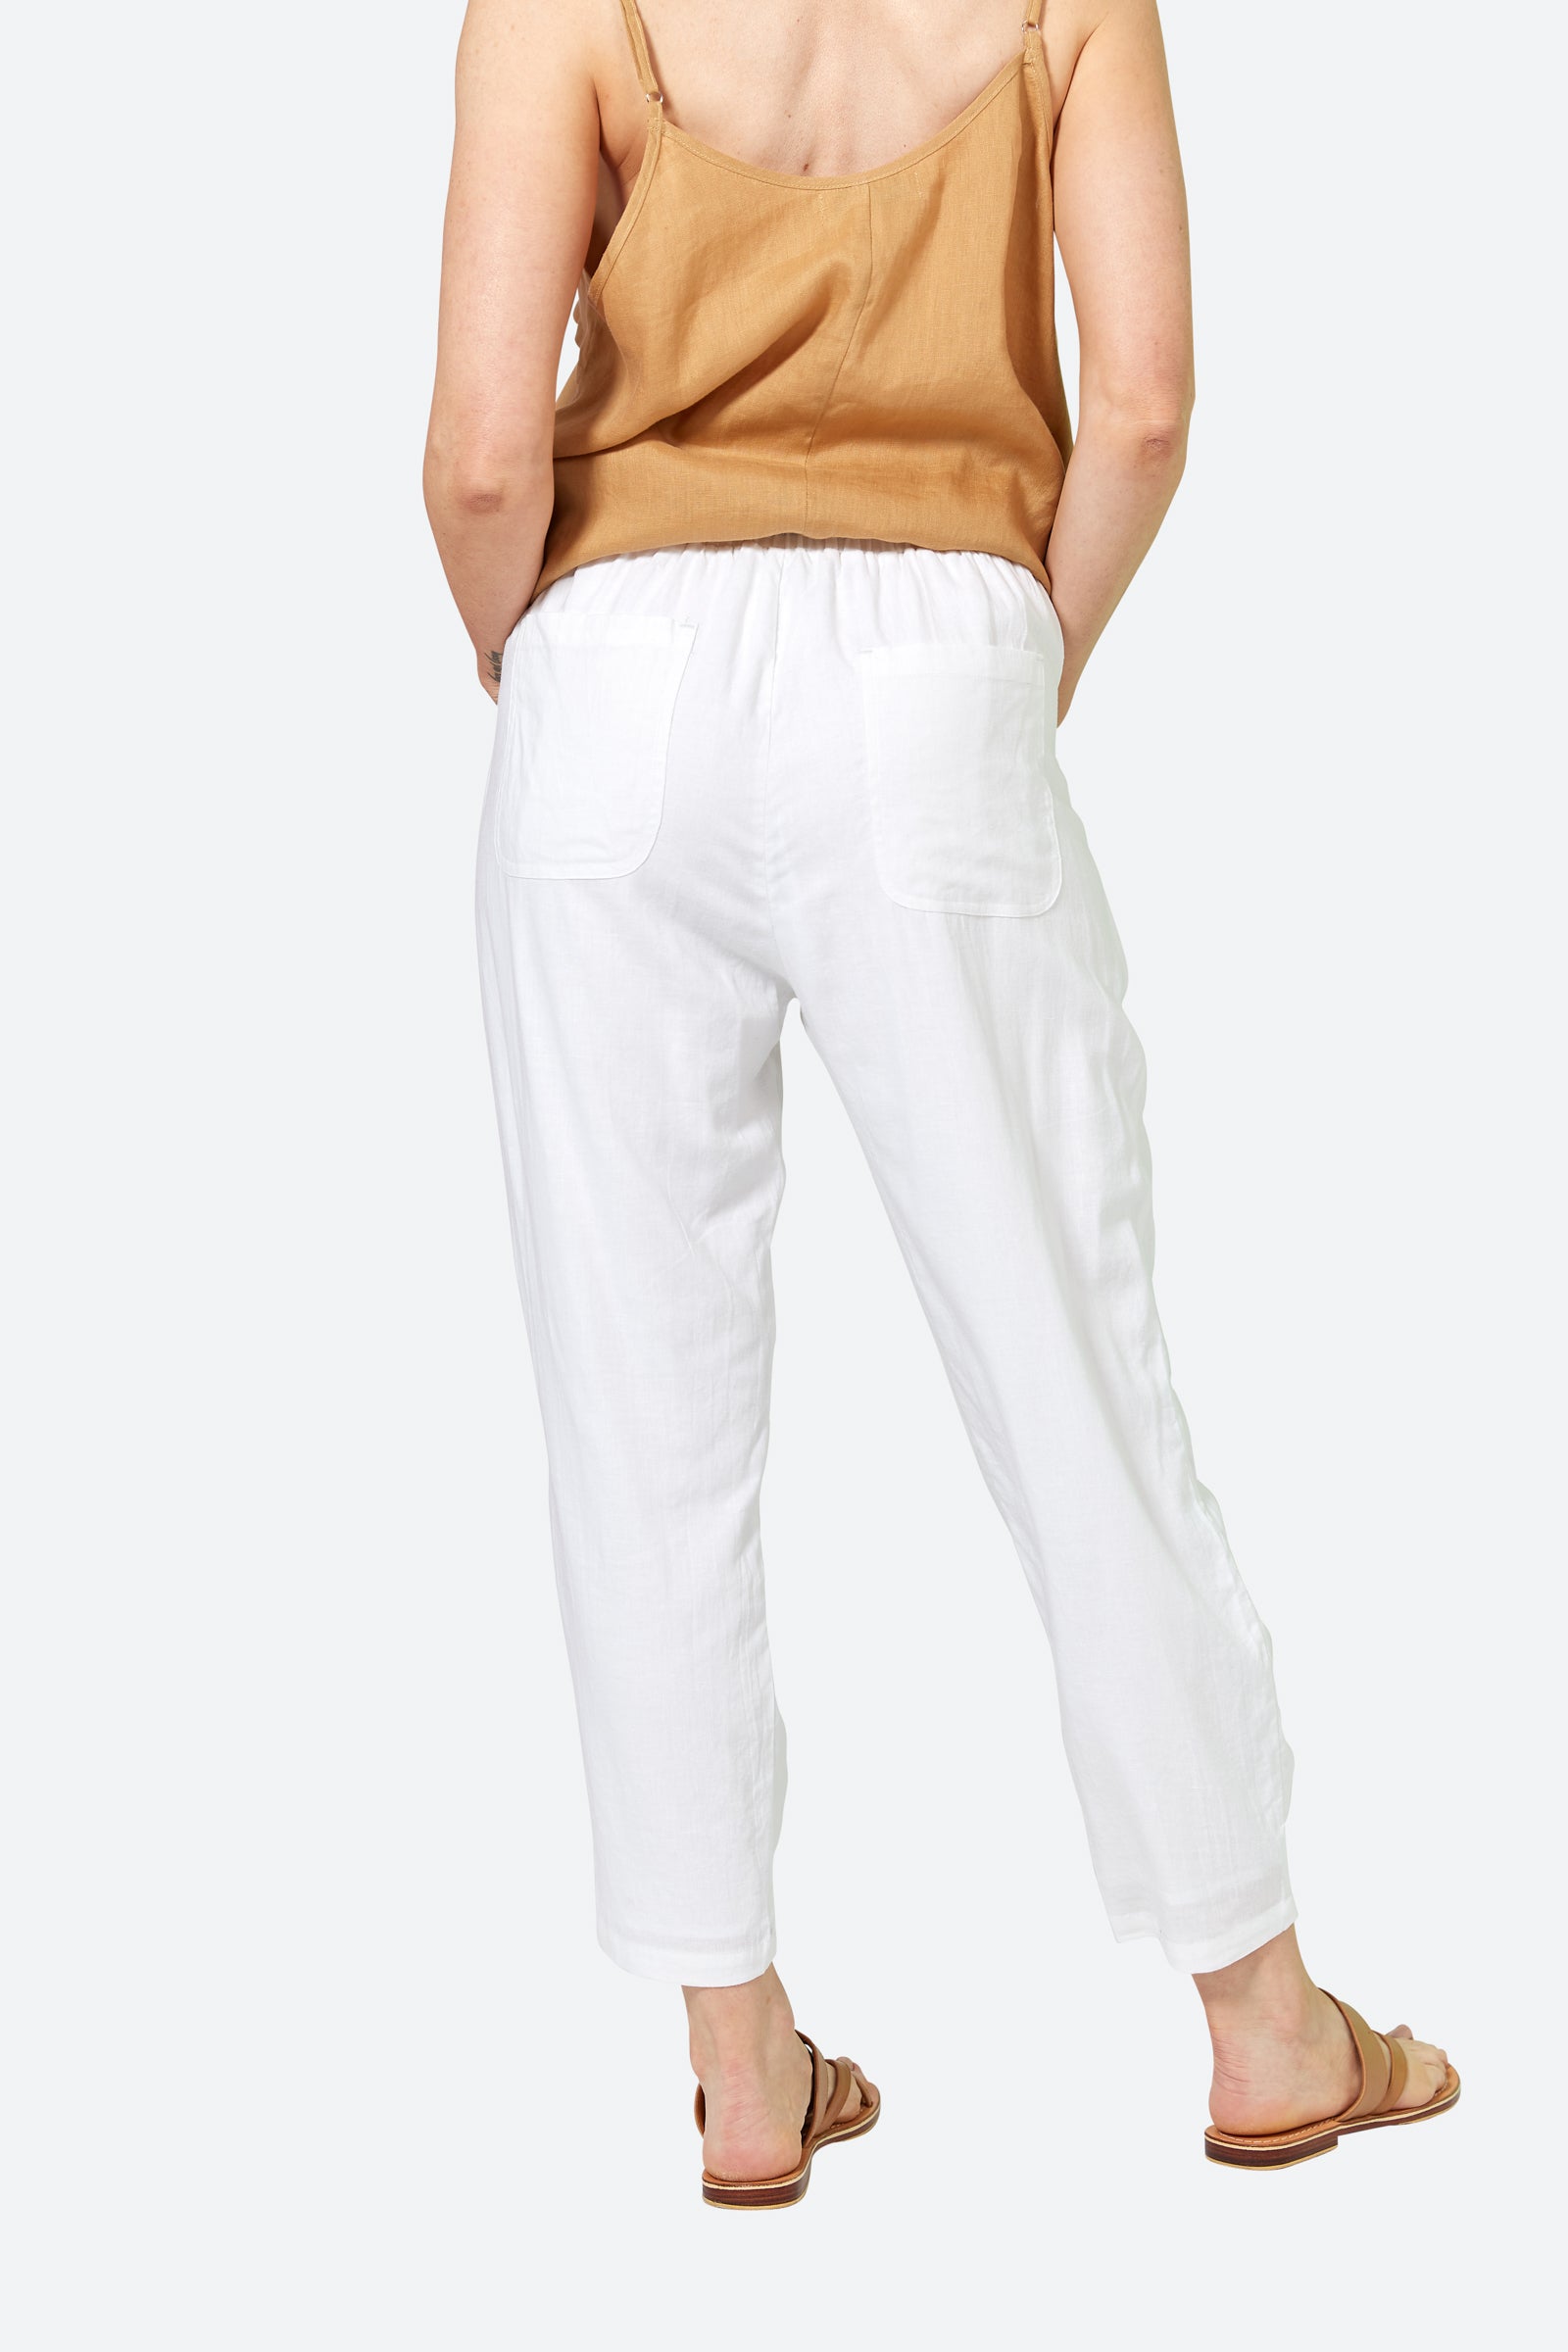 Verve Pant - Blanc - eb&ive Clothing - Pant Relaxed Linen